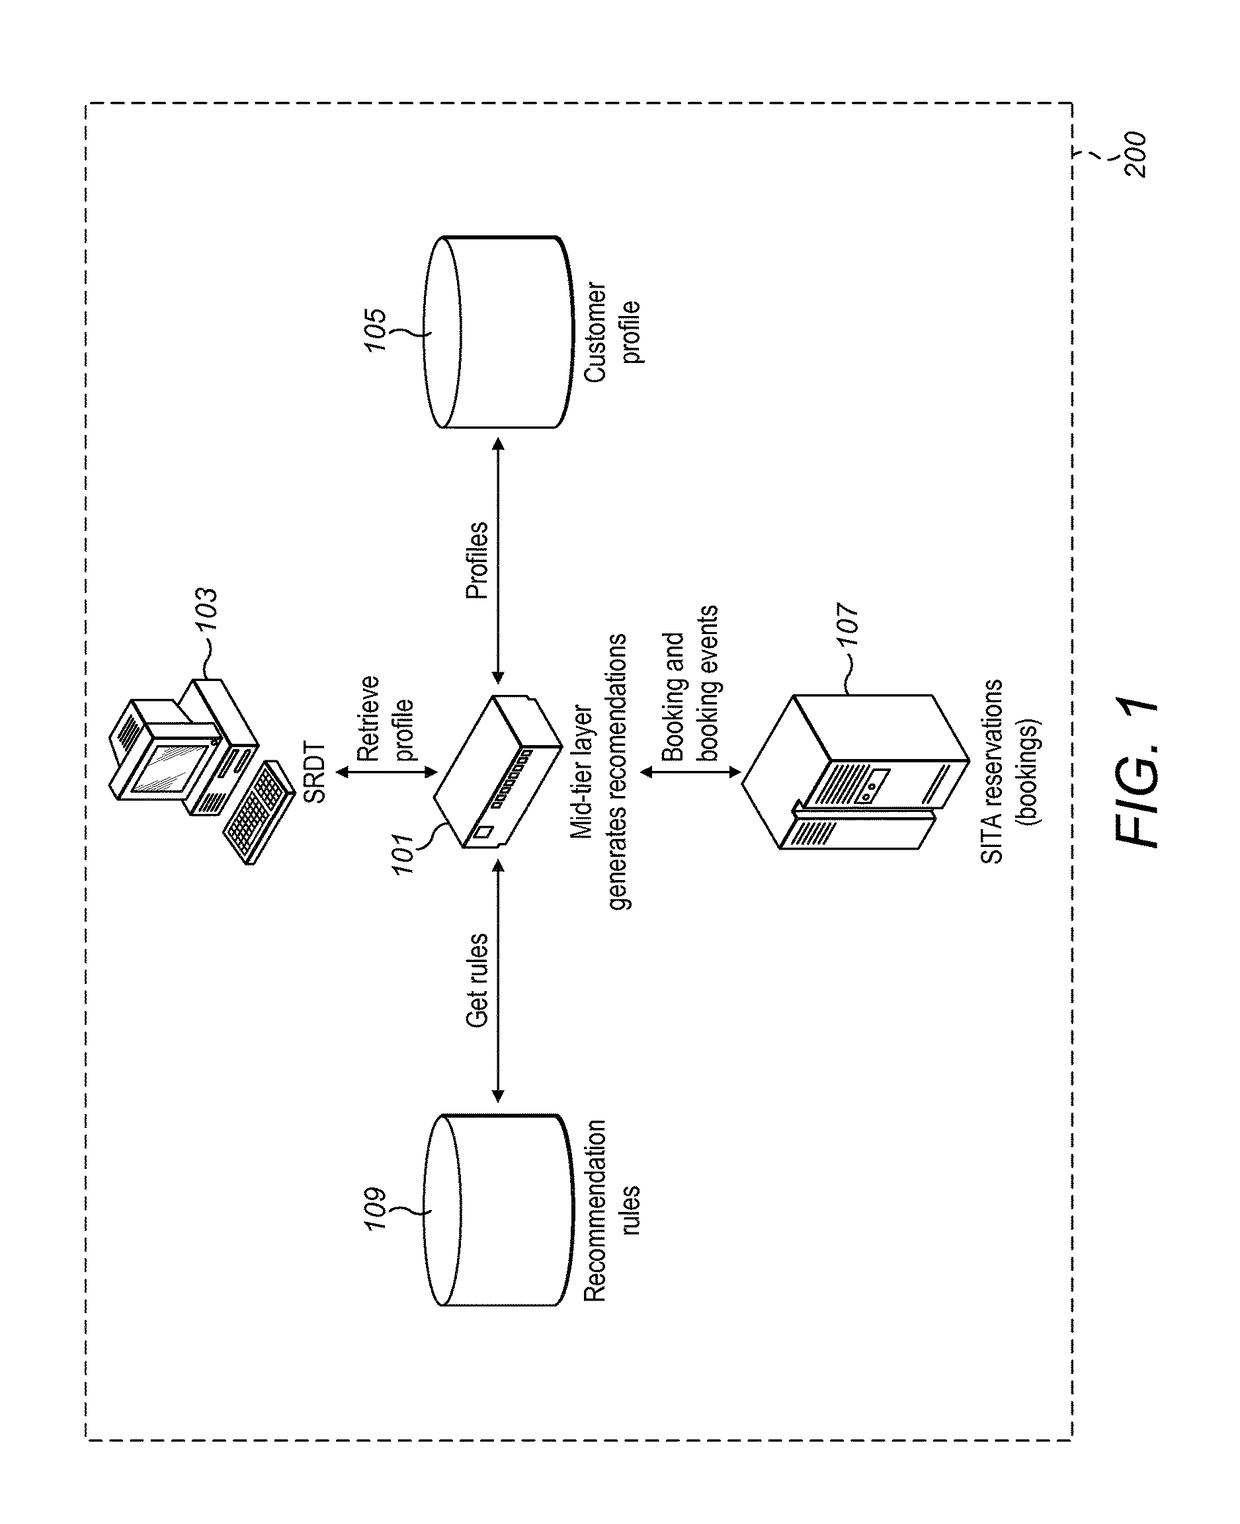 Improved customer profiling system and method therefor